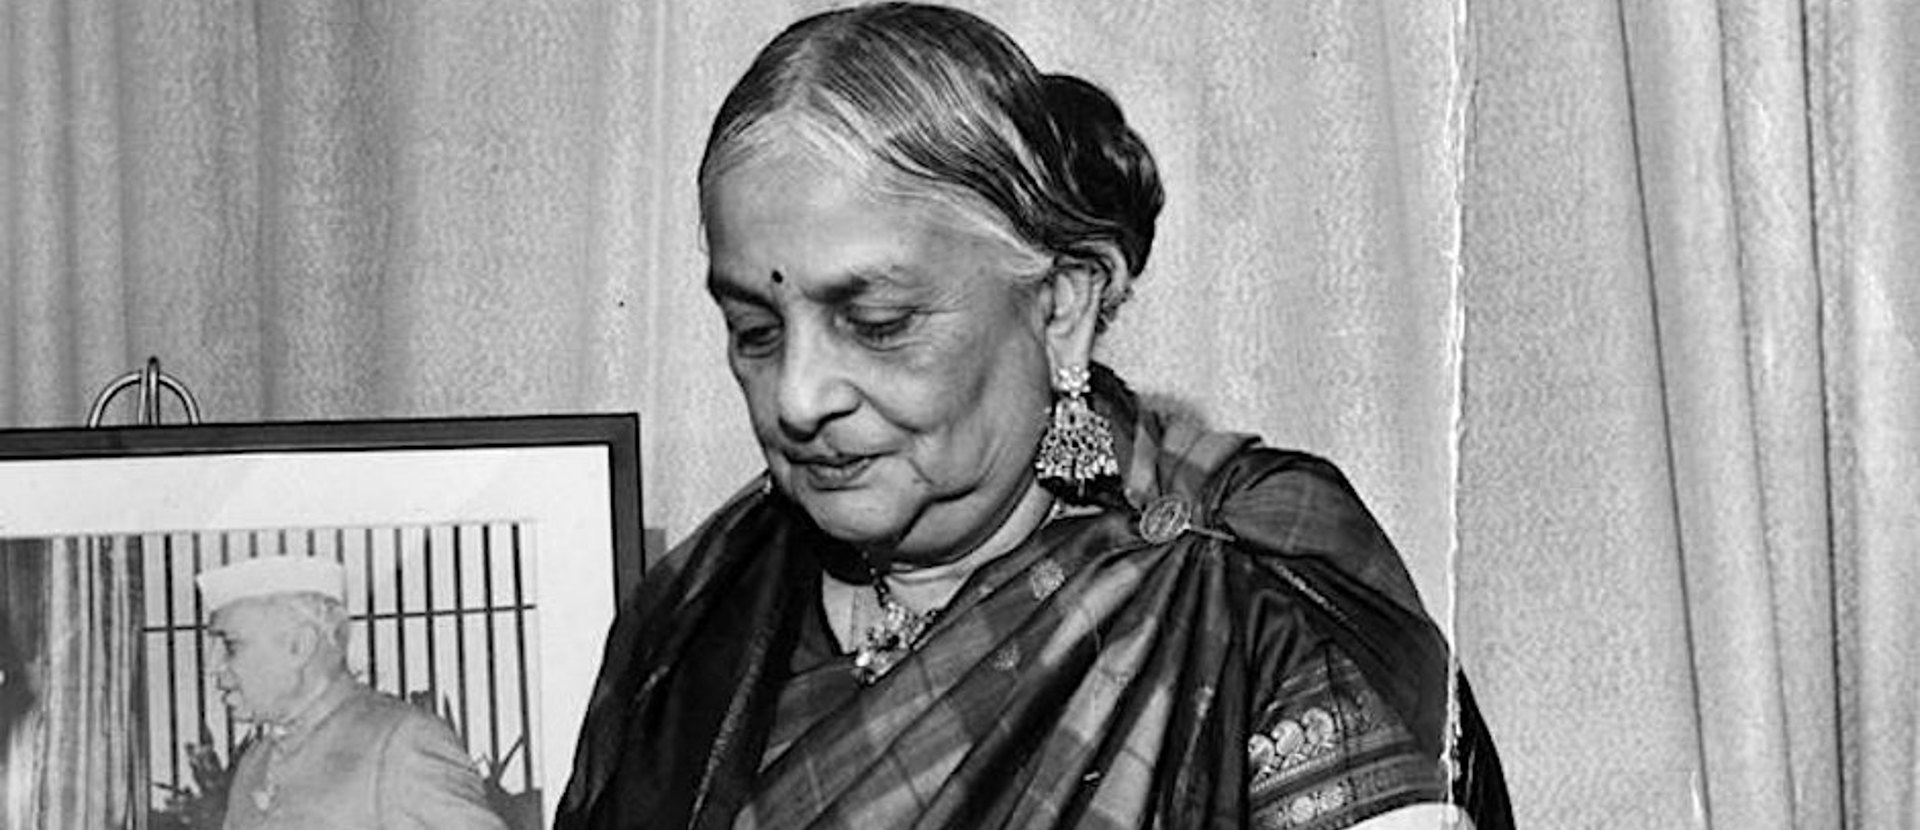 A women in Indian dress looking downwards. There is a picture of a person in a frame behind her.